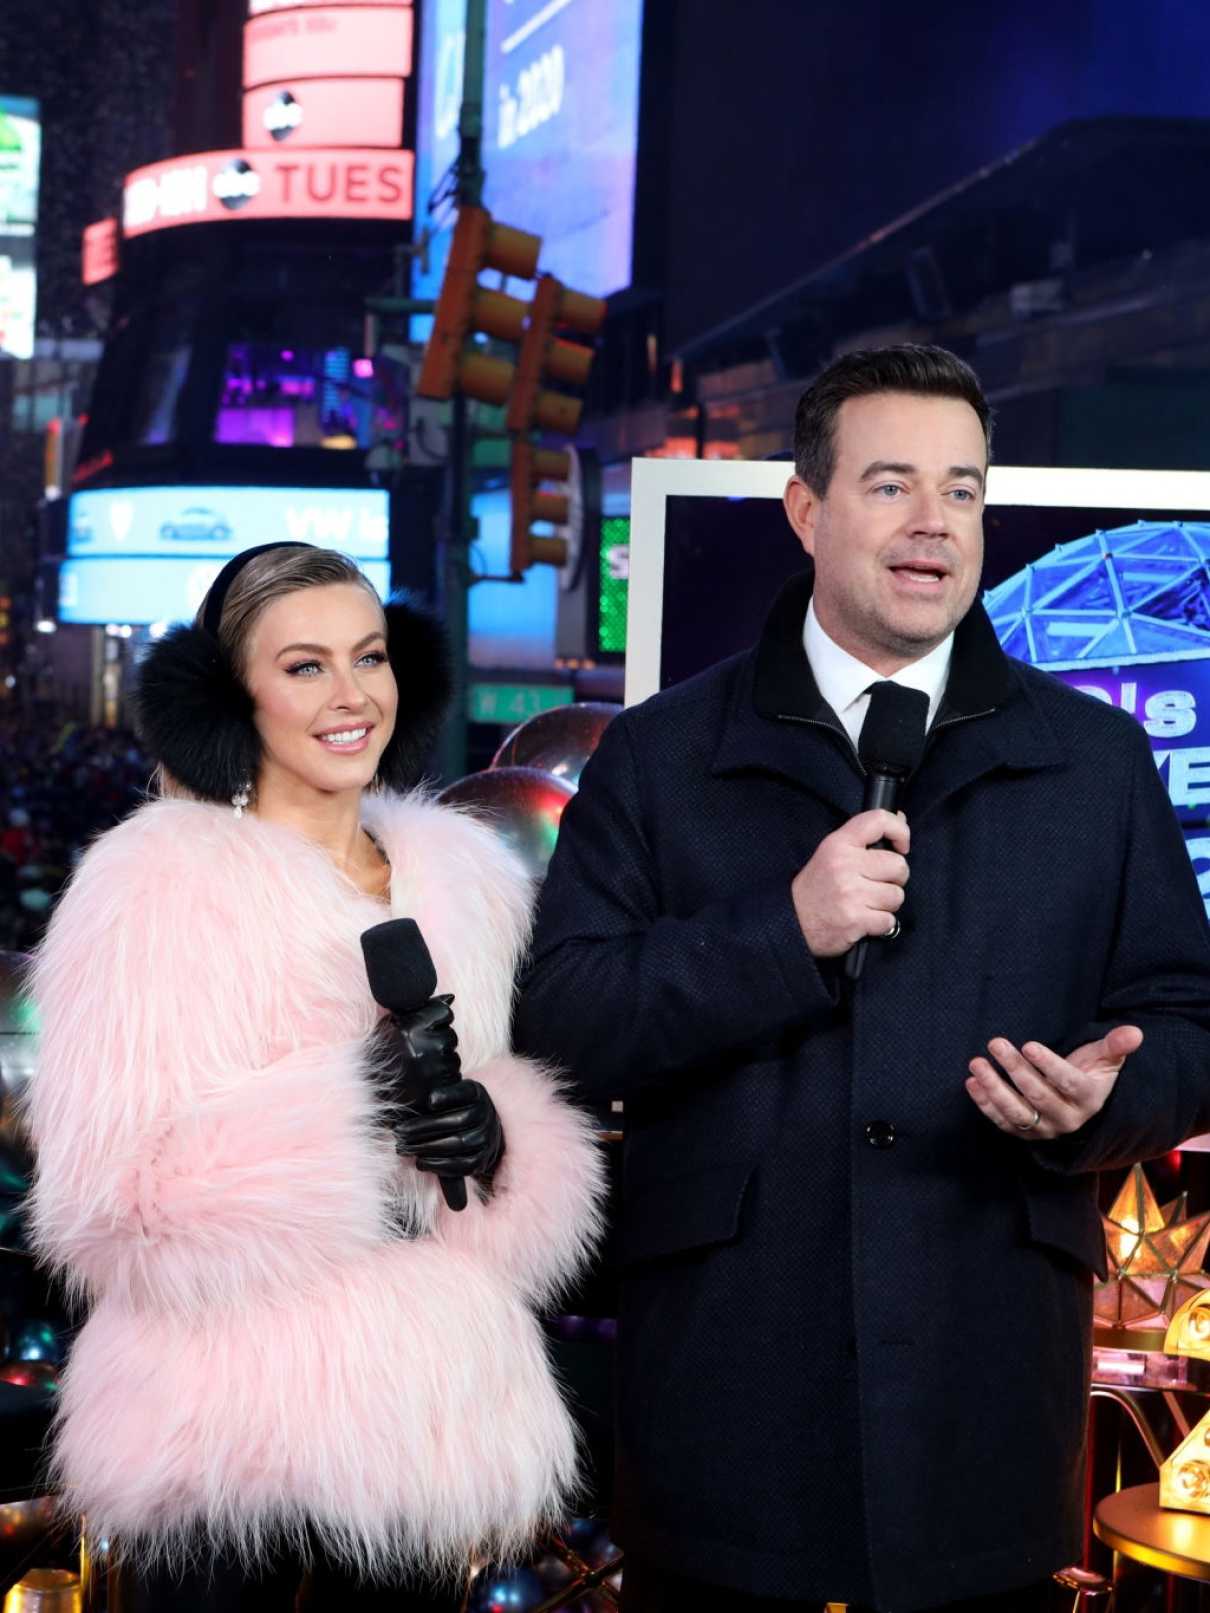 Julianne Hough Attends 2020 Nbc’s New Year’s Eve In New York City 12 31 2019 4 Lacelebs Co